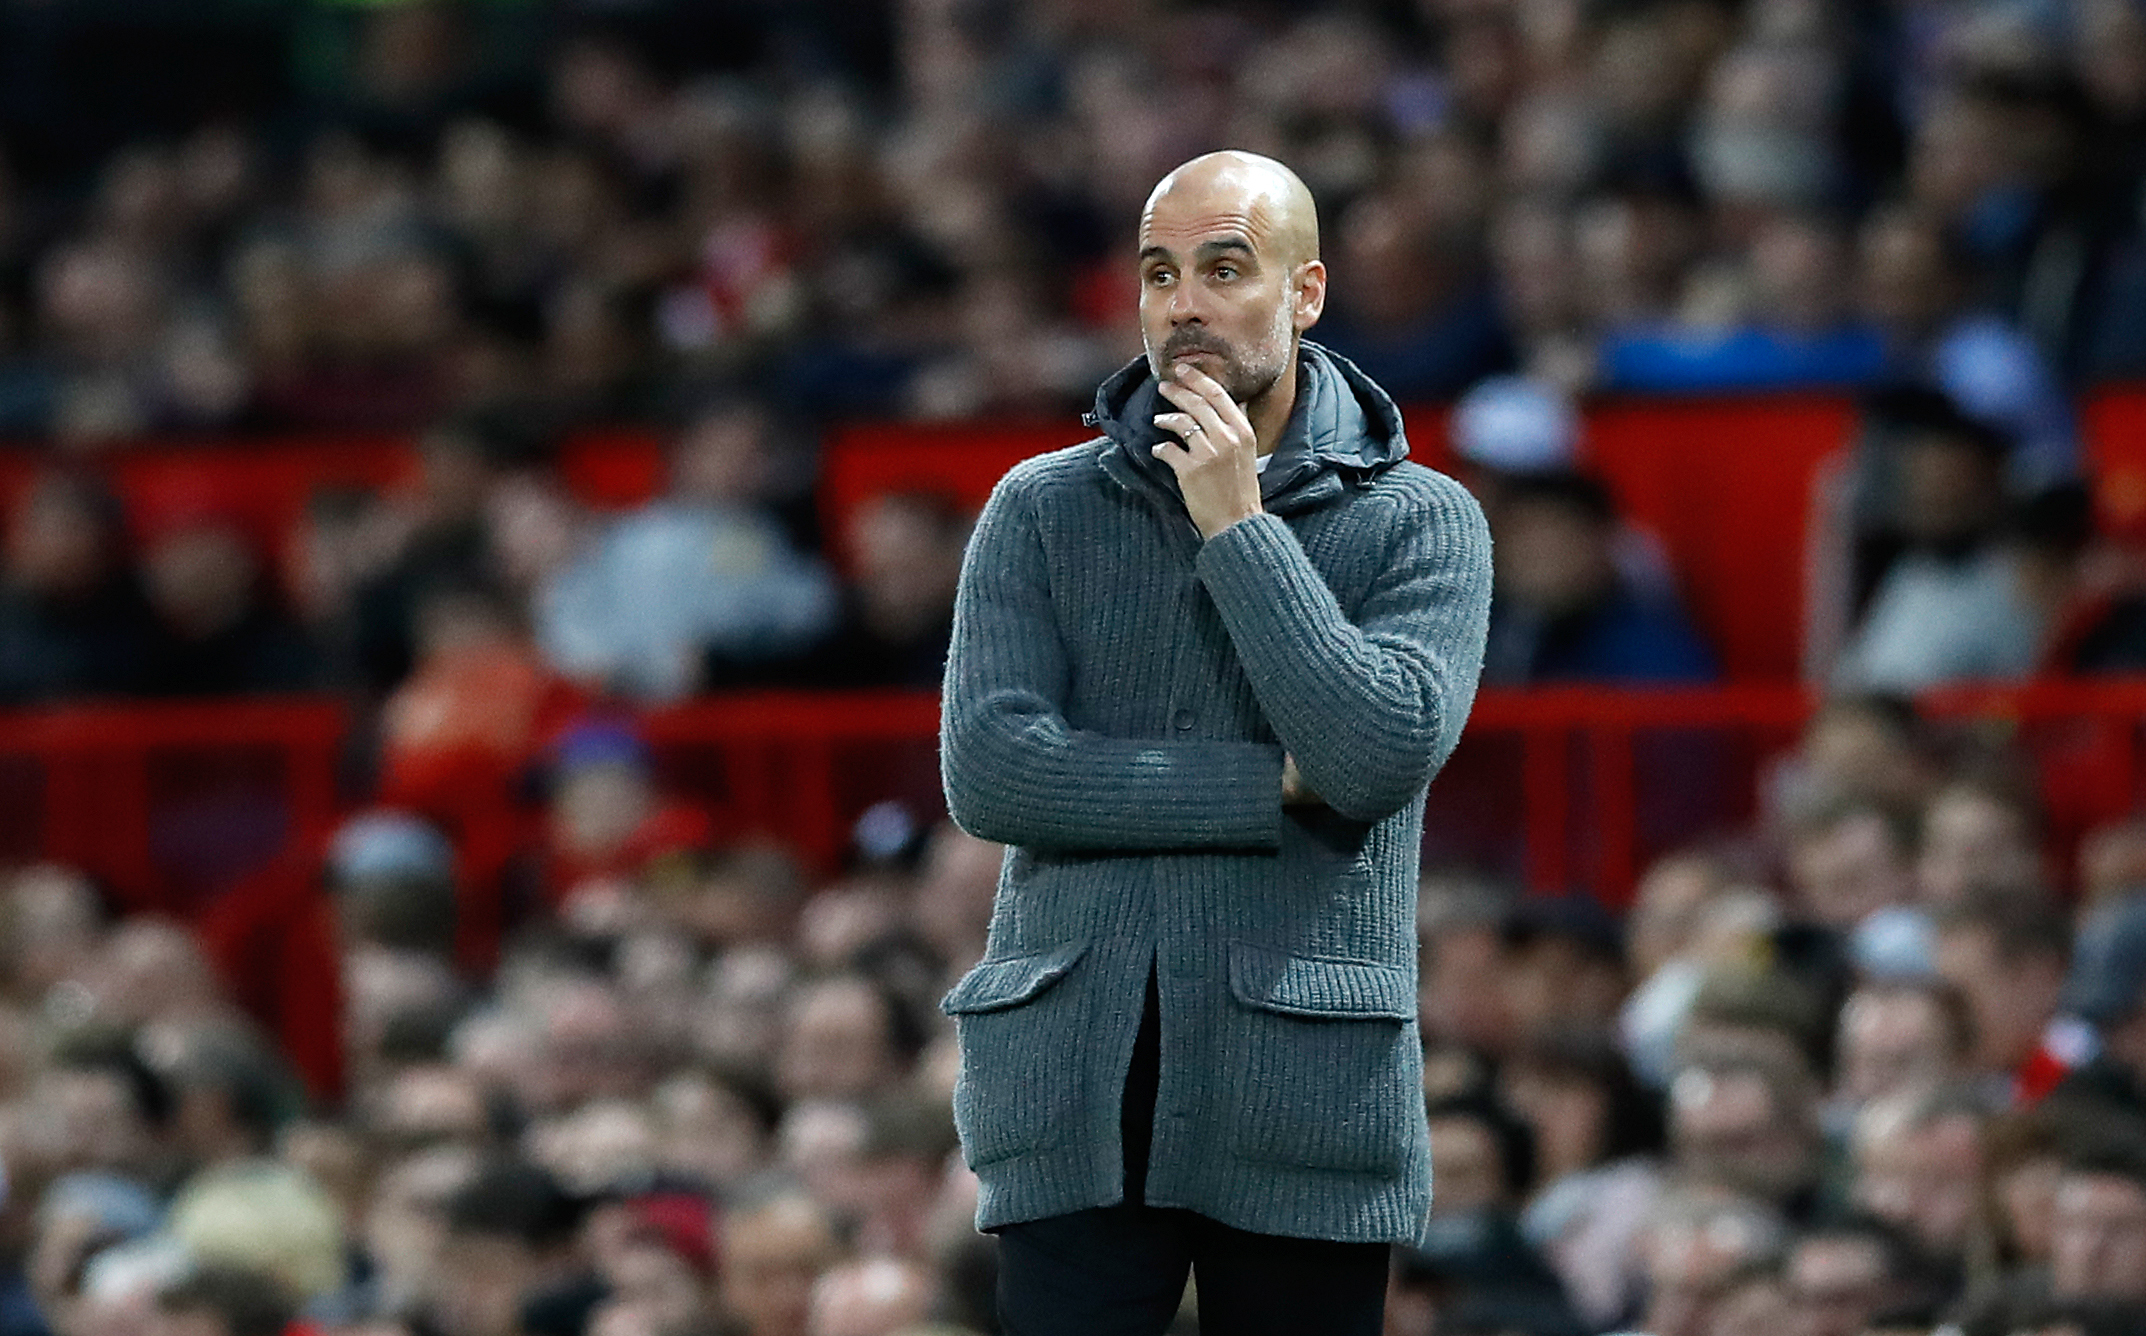 Manchester City manager Pep Guardiola on the touchline during a Premier League match at Old Trafford, Manchester